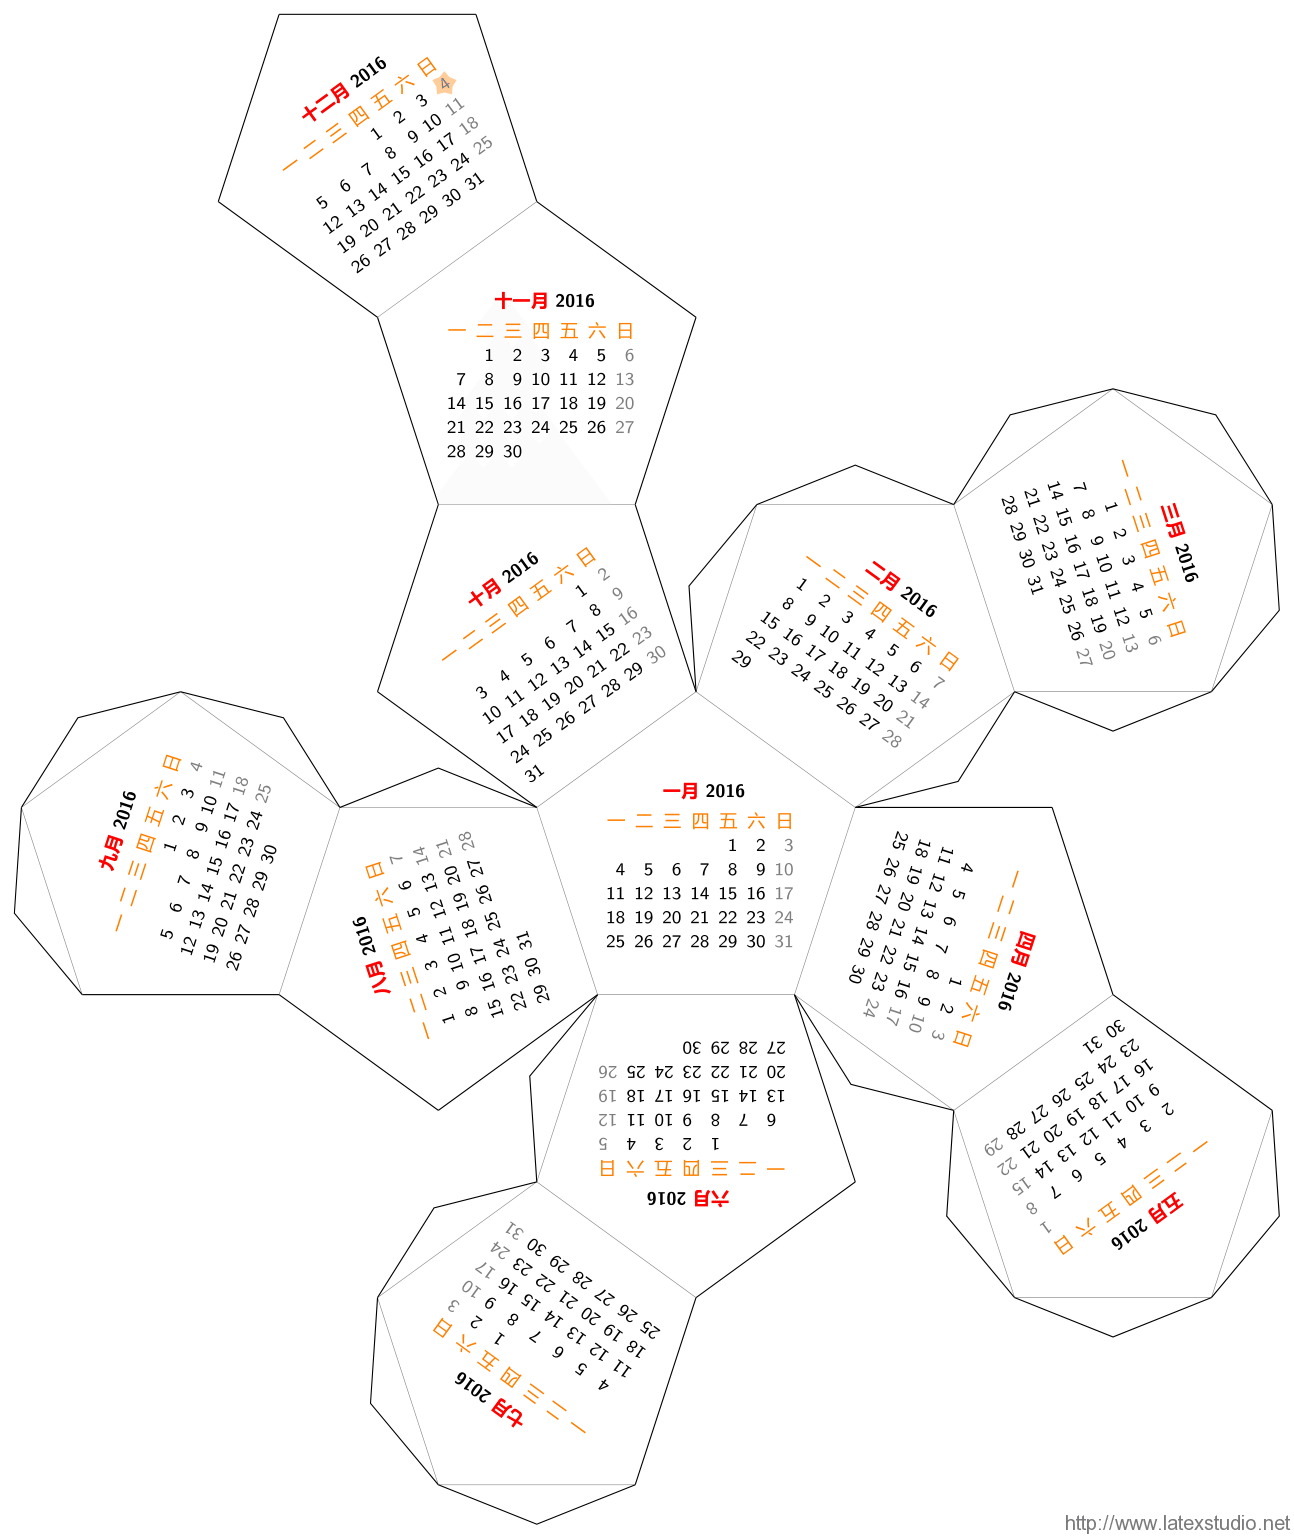 zh-calendar-dodecahedron-1